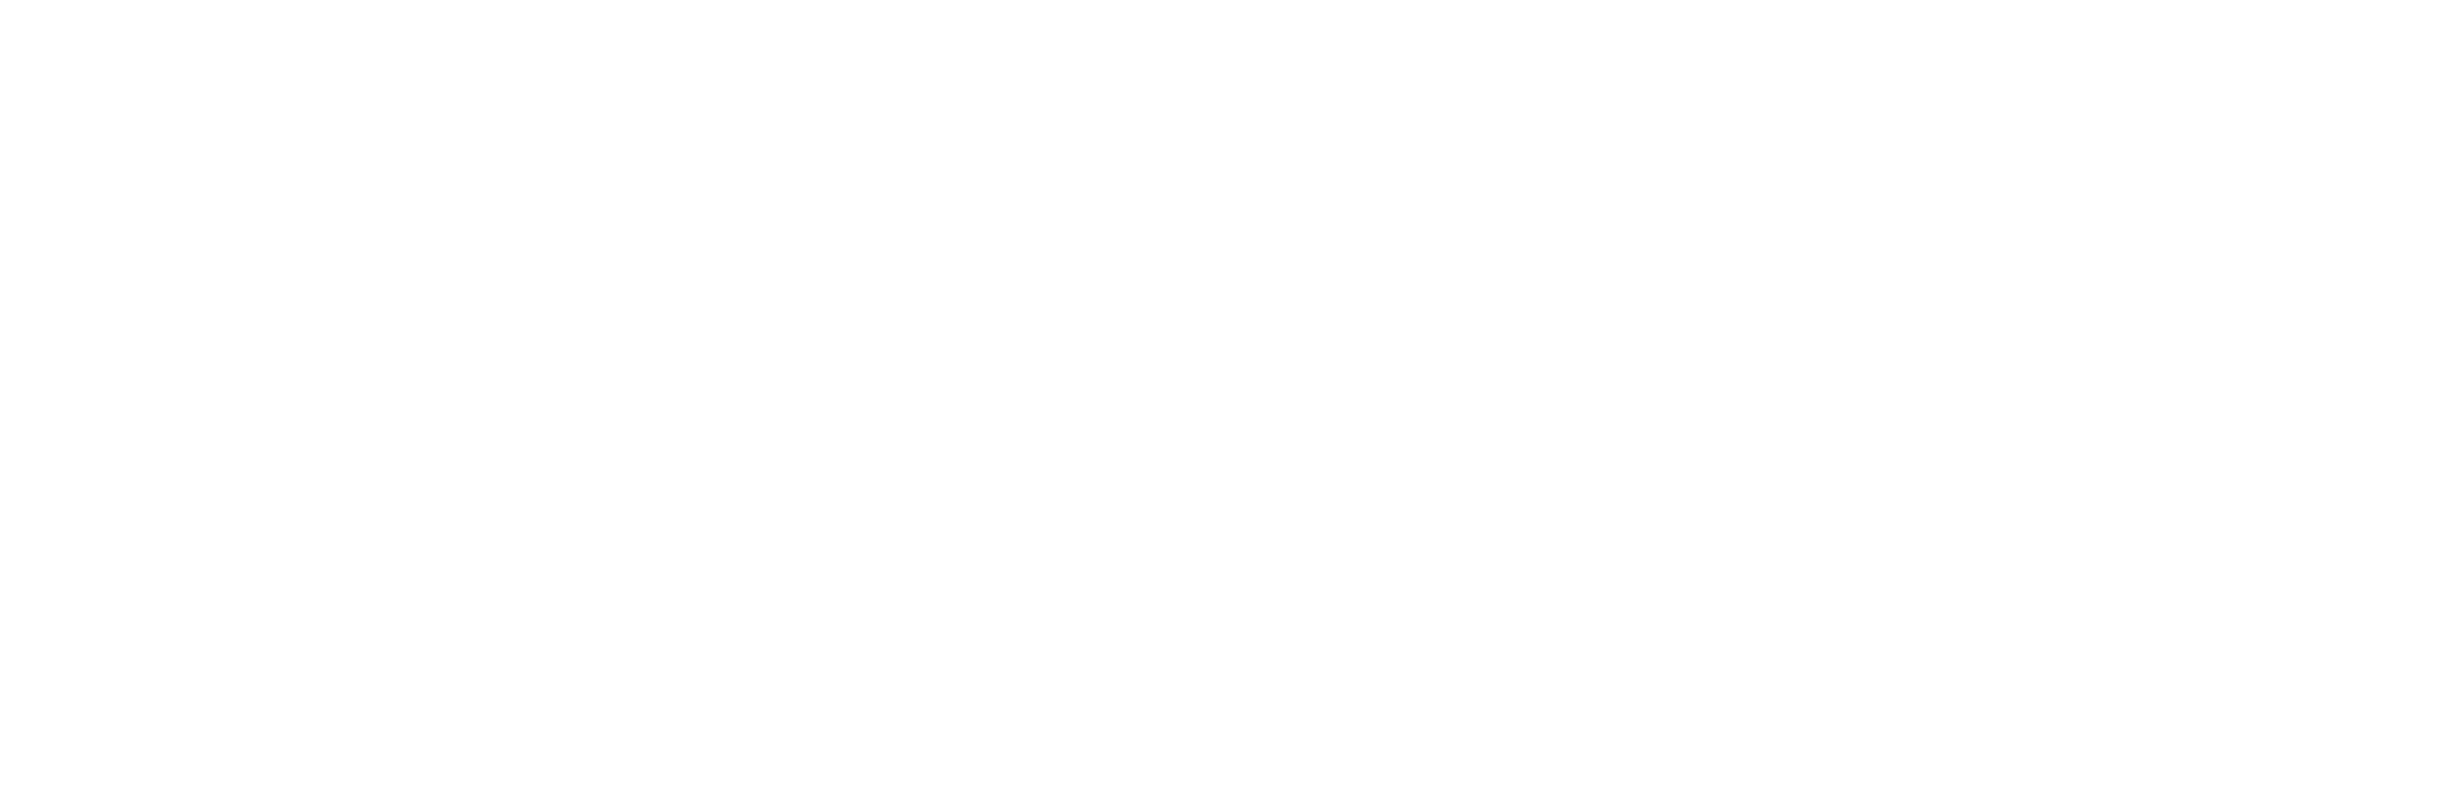 As of September 2023 72% of the world population had received at least one dose of a COVID-19 vaccine. 13.5 billion doses had been administered globally. The estimated number of total deaths caused by COVID-19 stands at nearly 7 million